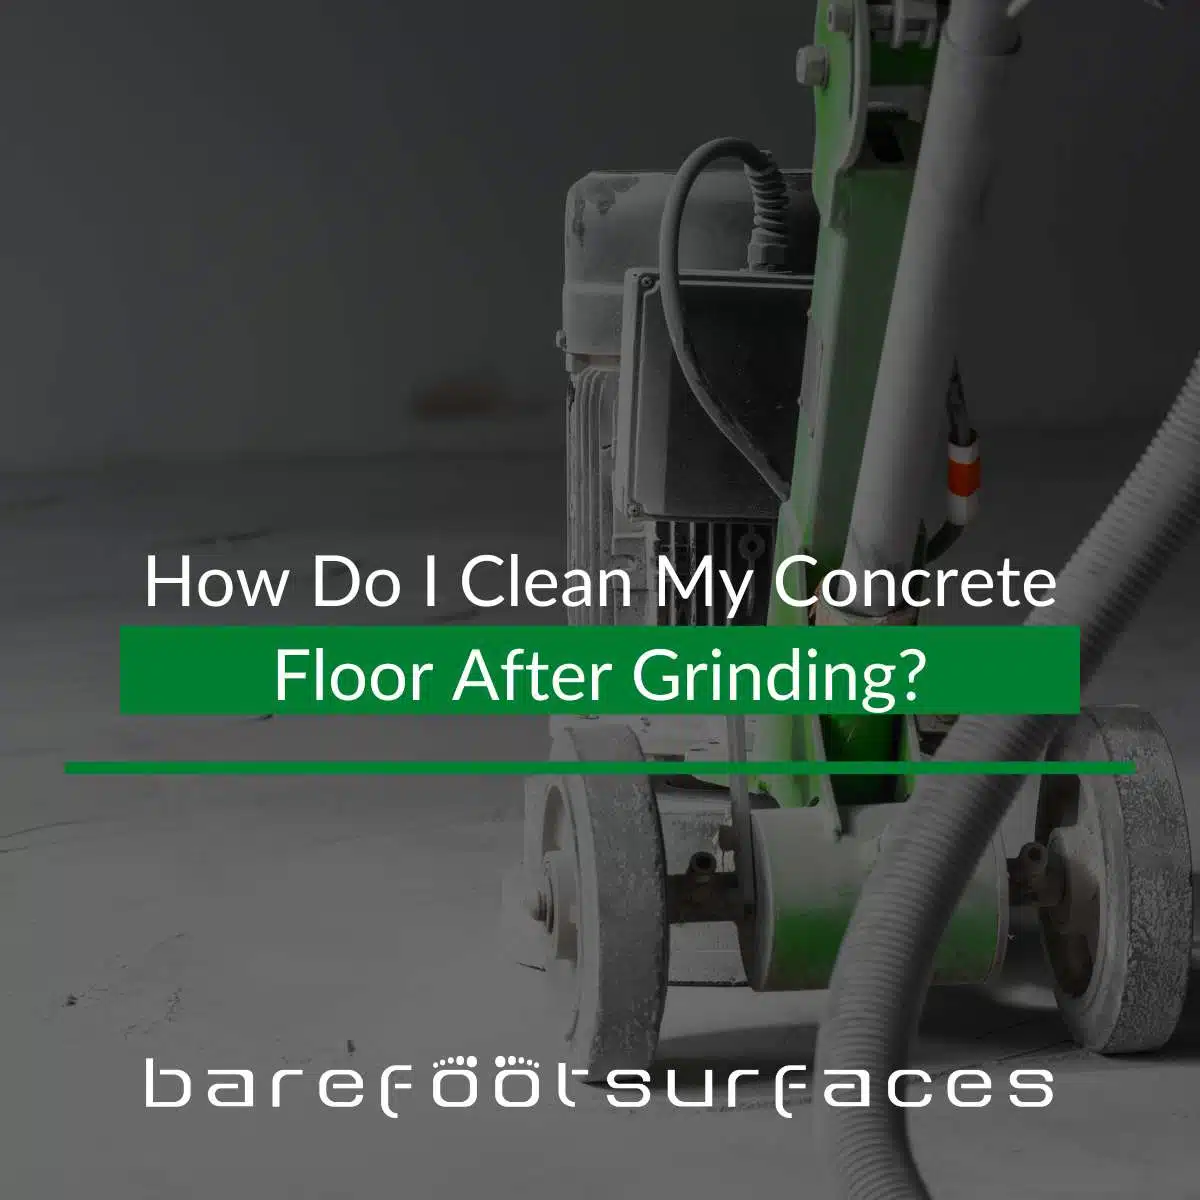 How Do I Clean My Concrete Floor After Grinding